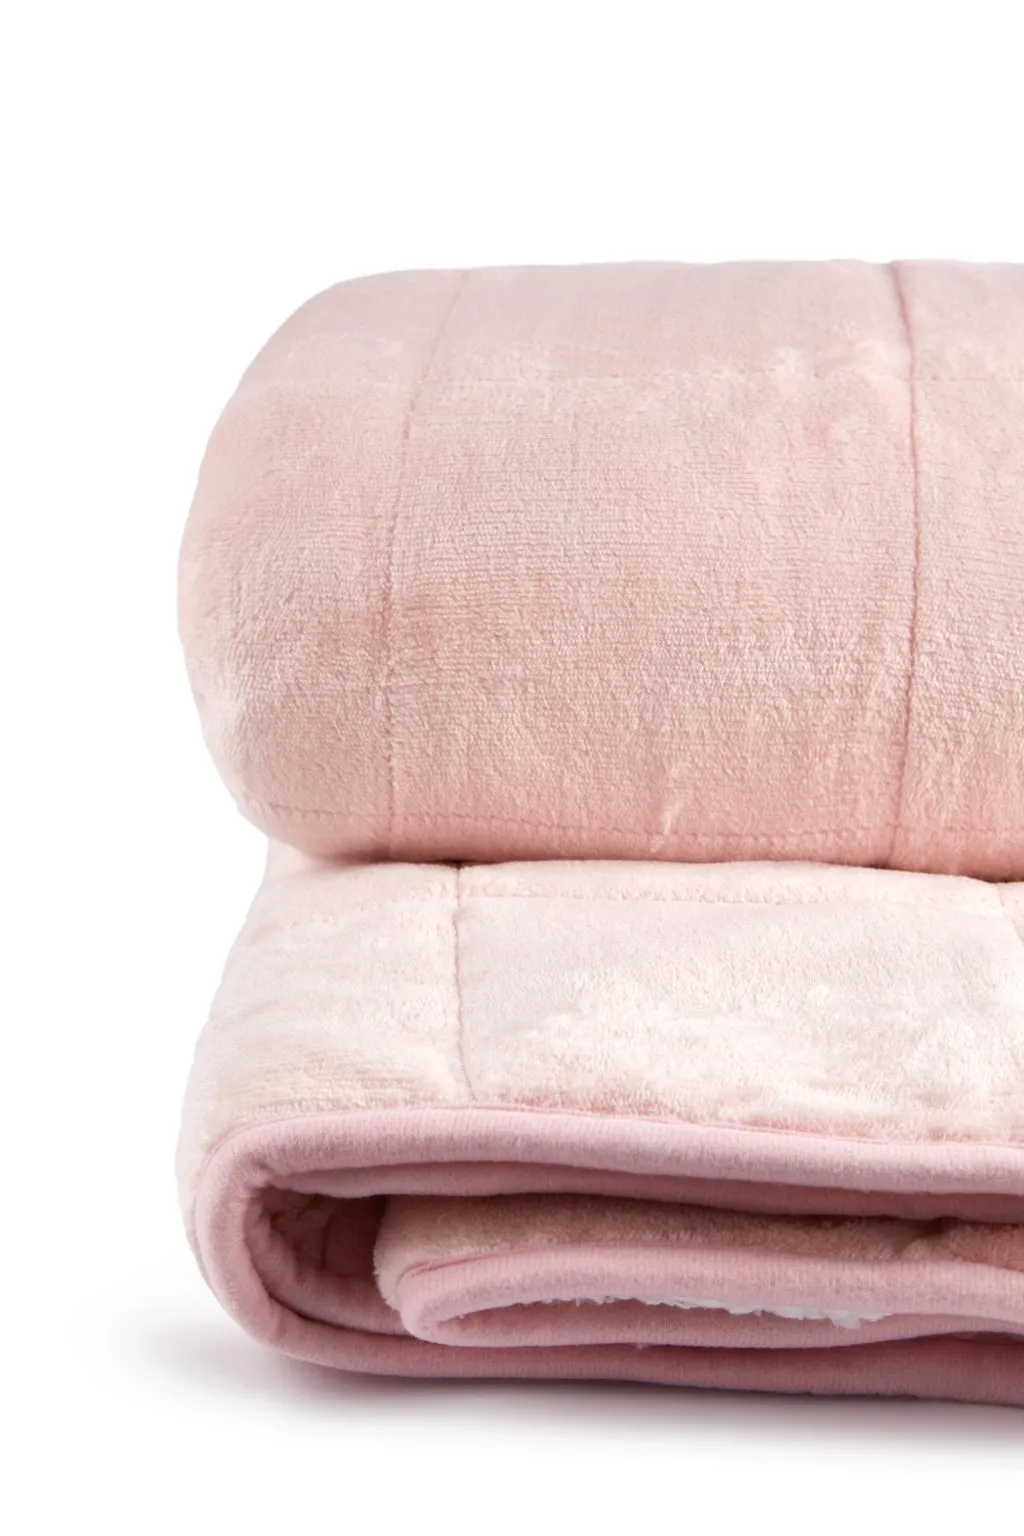 Cosy Pink Weighted Blankets – ideal for sofas, beds and chairs